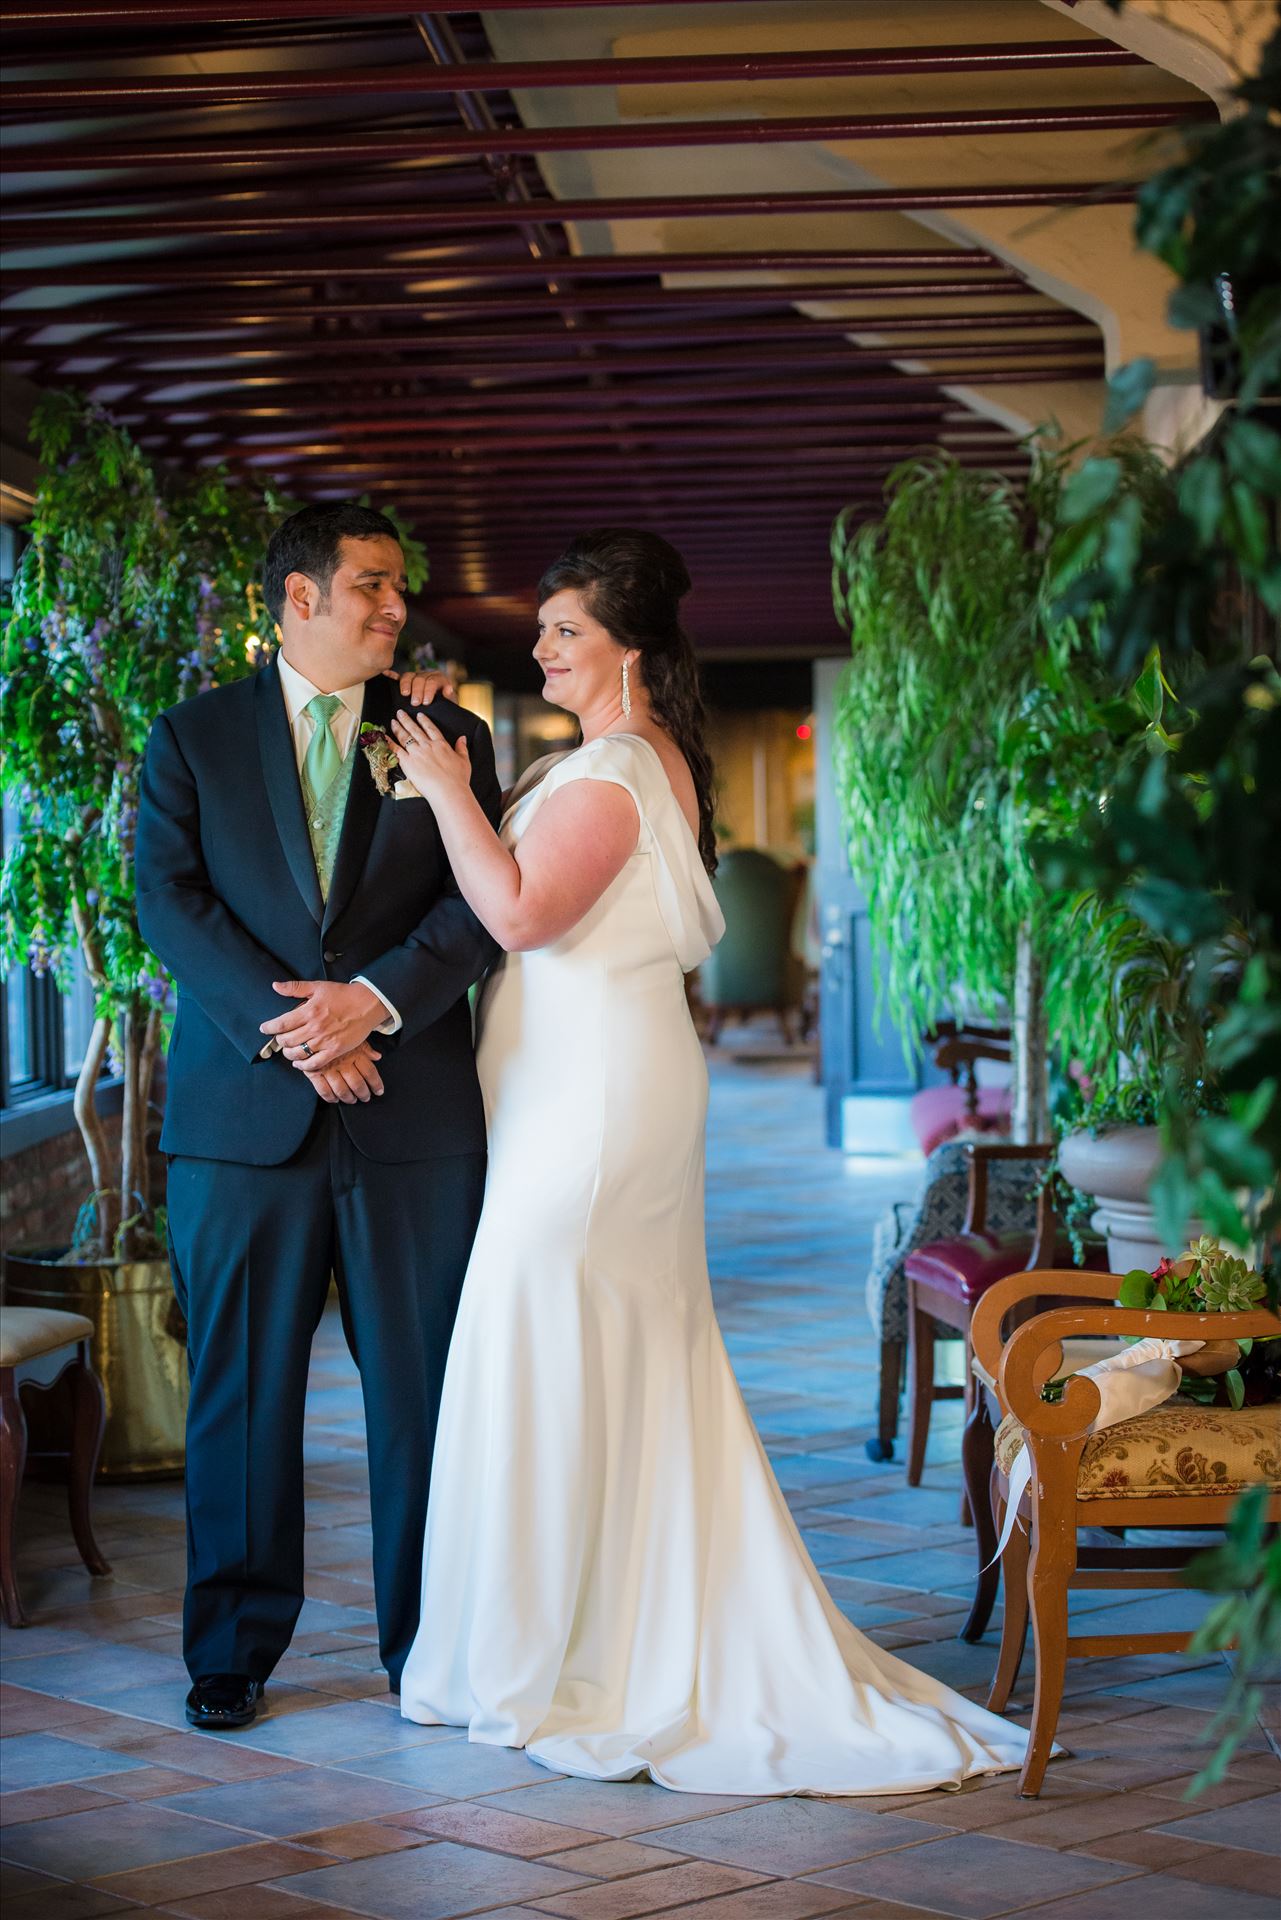 Mary and Alejandro 14 - Wedding photography at the Historic Santa Maria Inn in Santa Maria, California by Mirror's Edge Photography. Bride and Groom in breezeway between the Taproom and the Front Desk at the Santa Maria Inn after wedding. by Sarah Williams